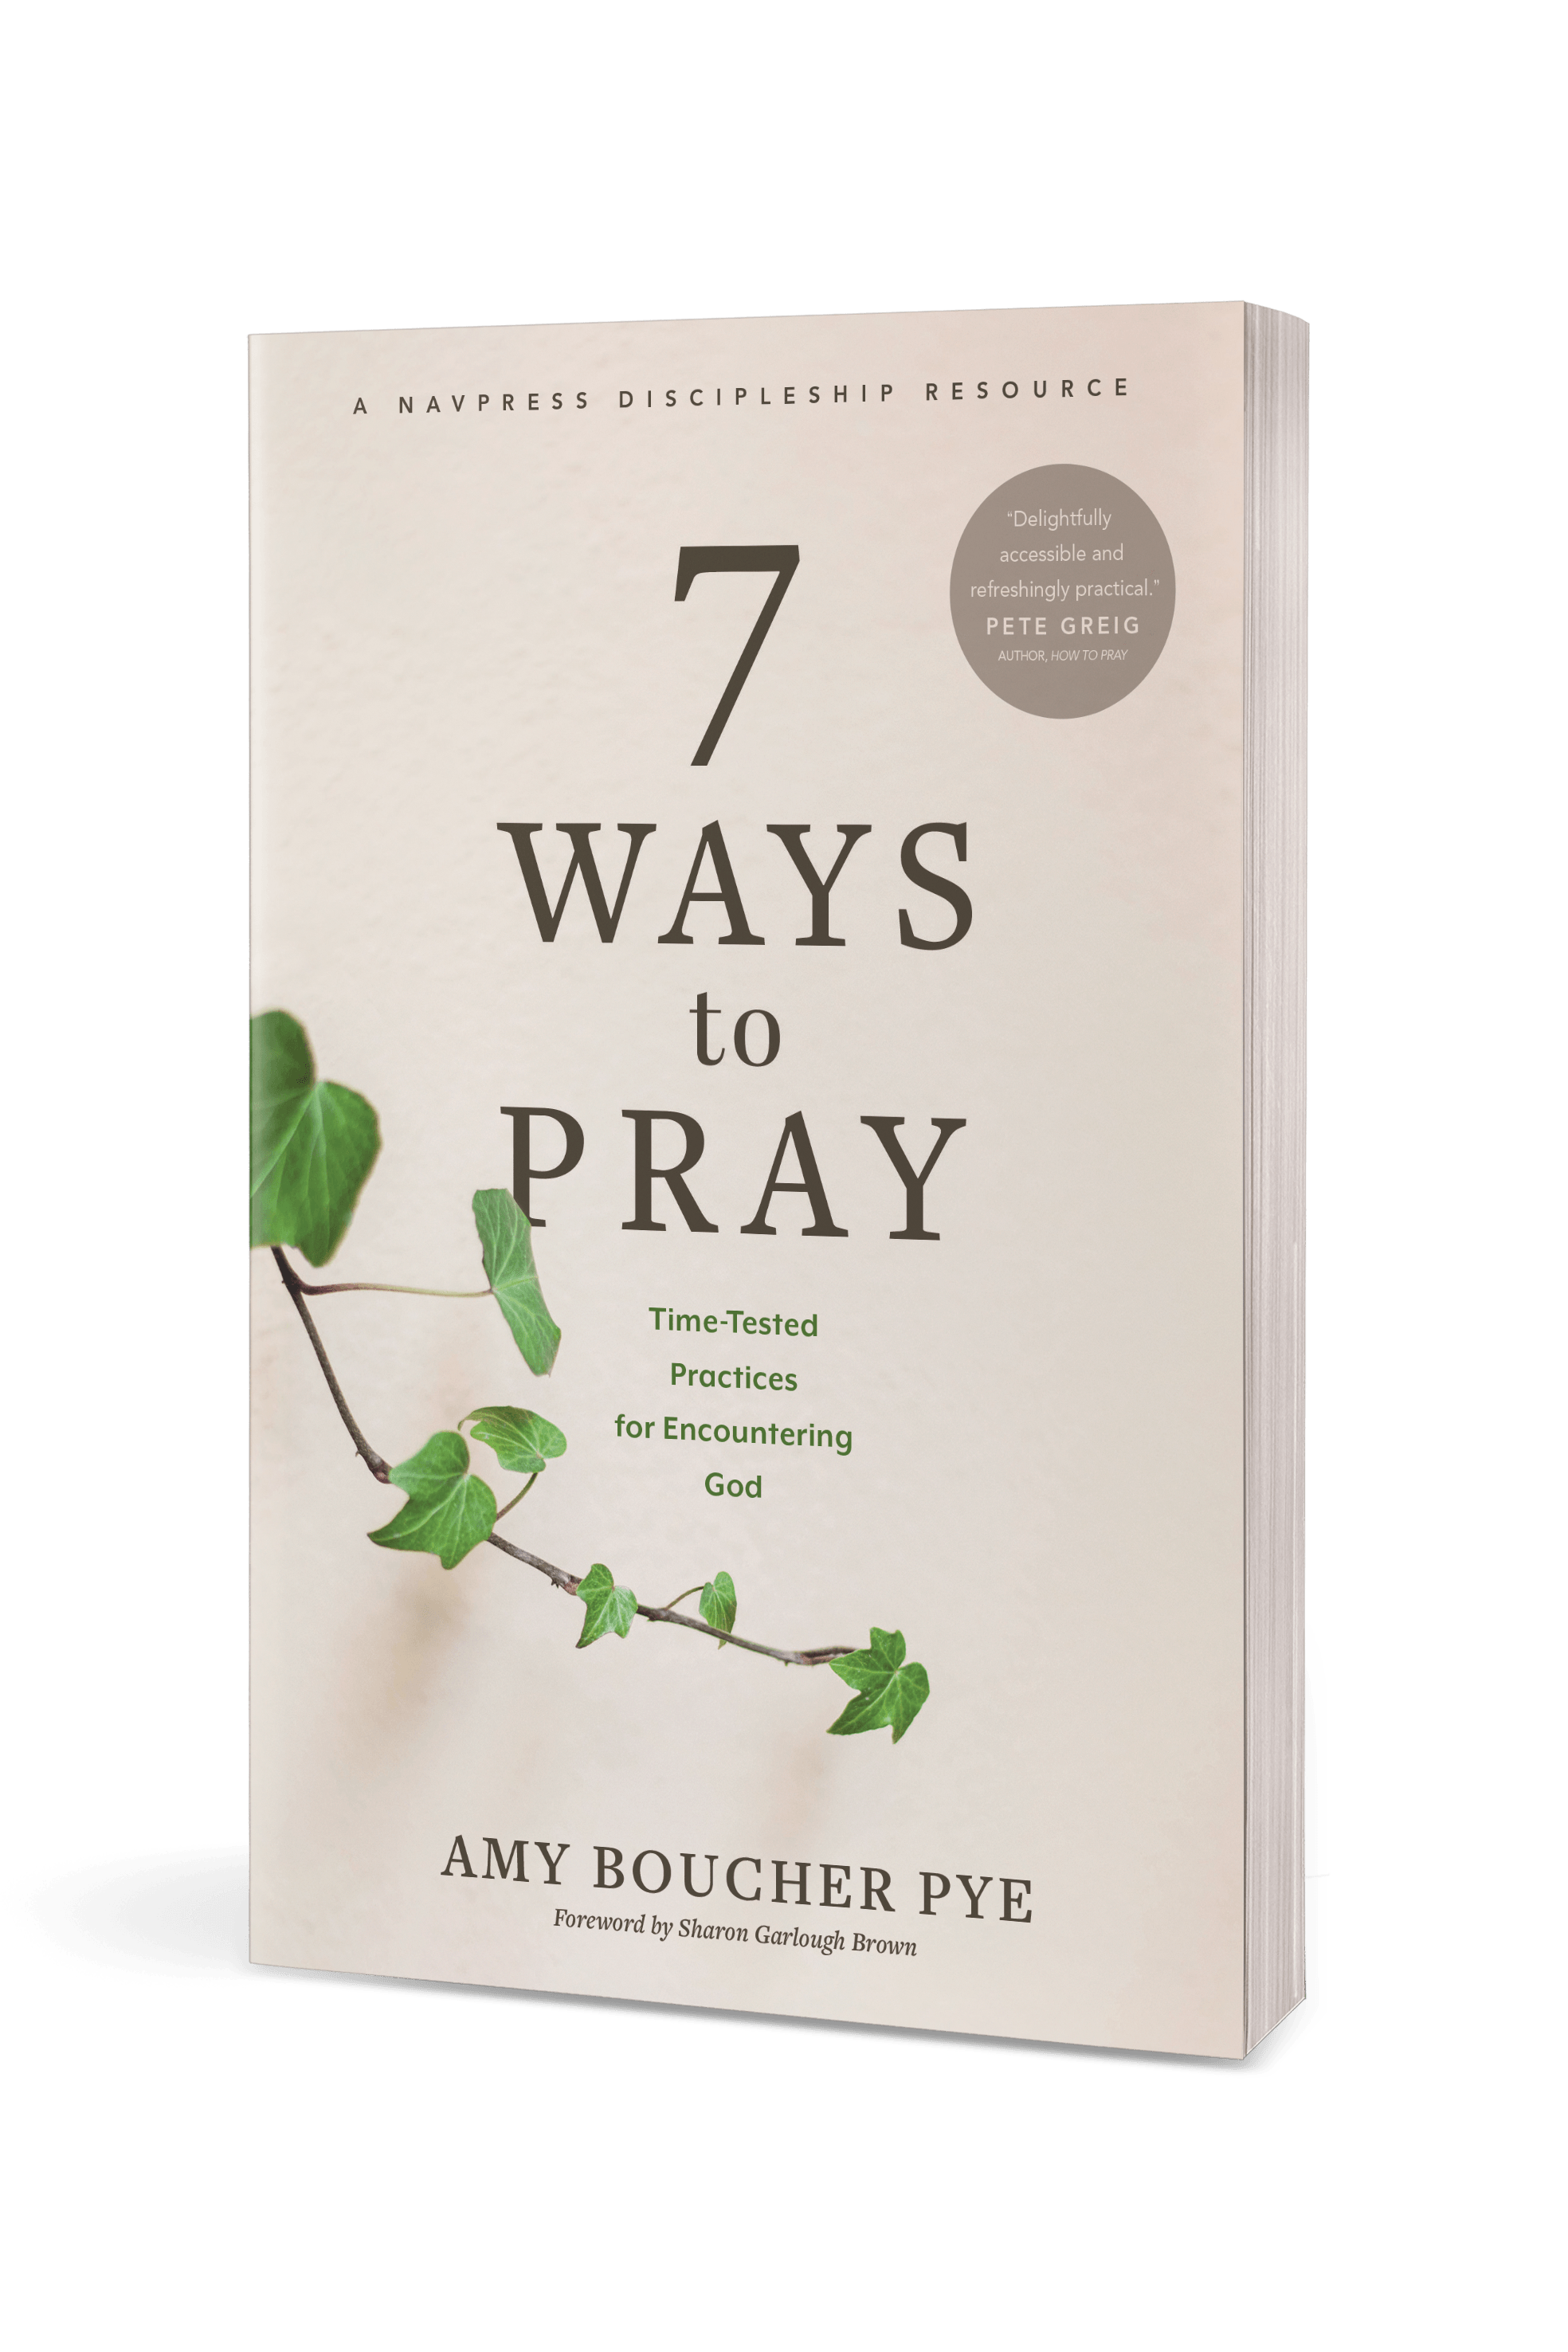 7 Ways to Pray book cover